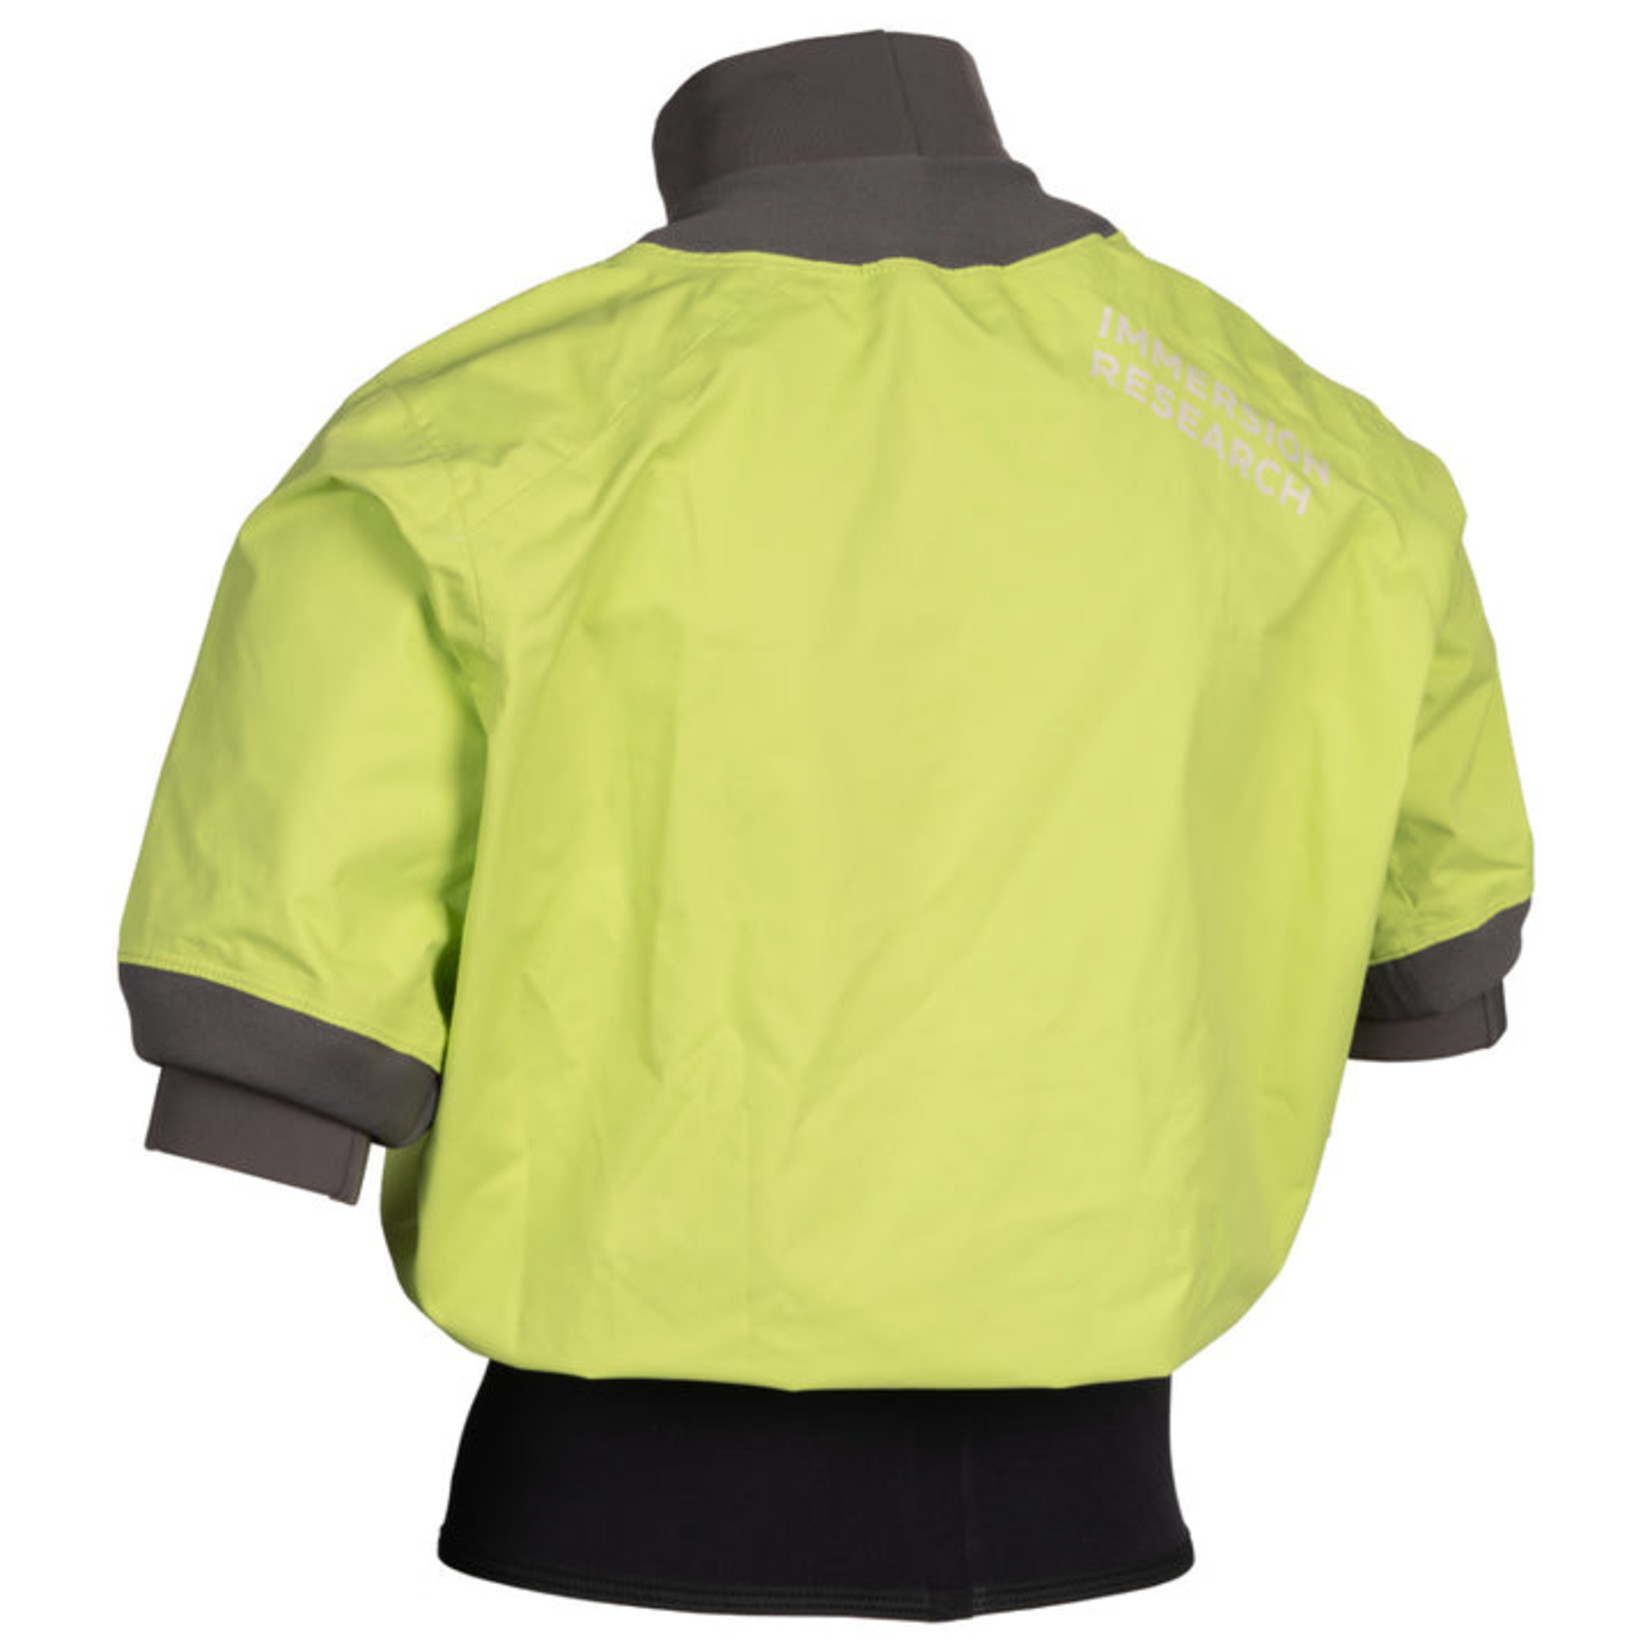 Immersion Research Immersion Research Short Sleeve Nano Jacket